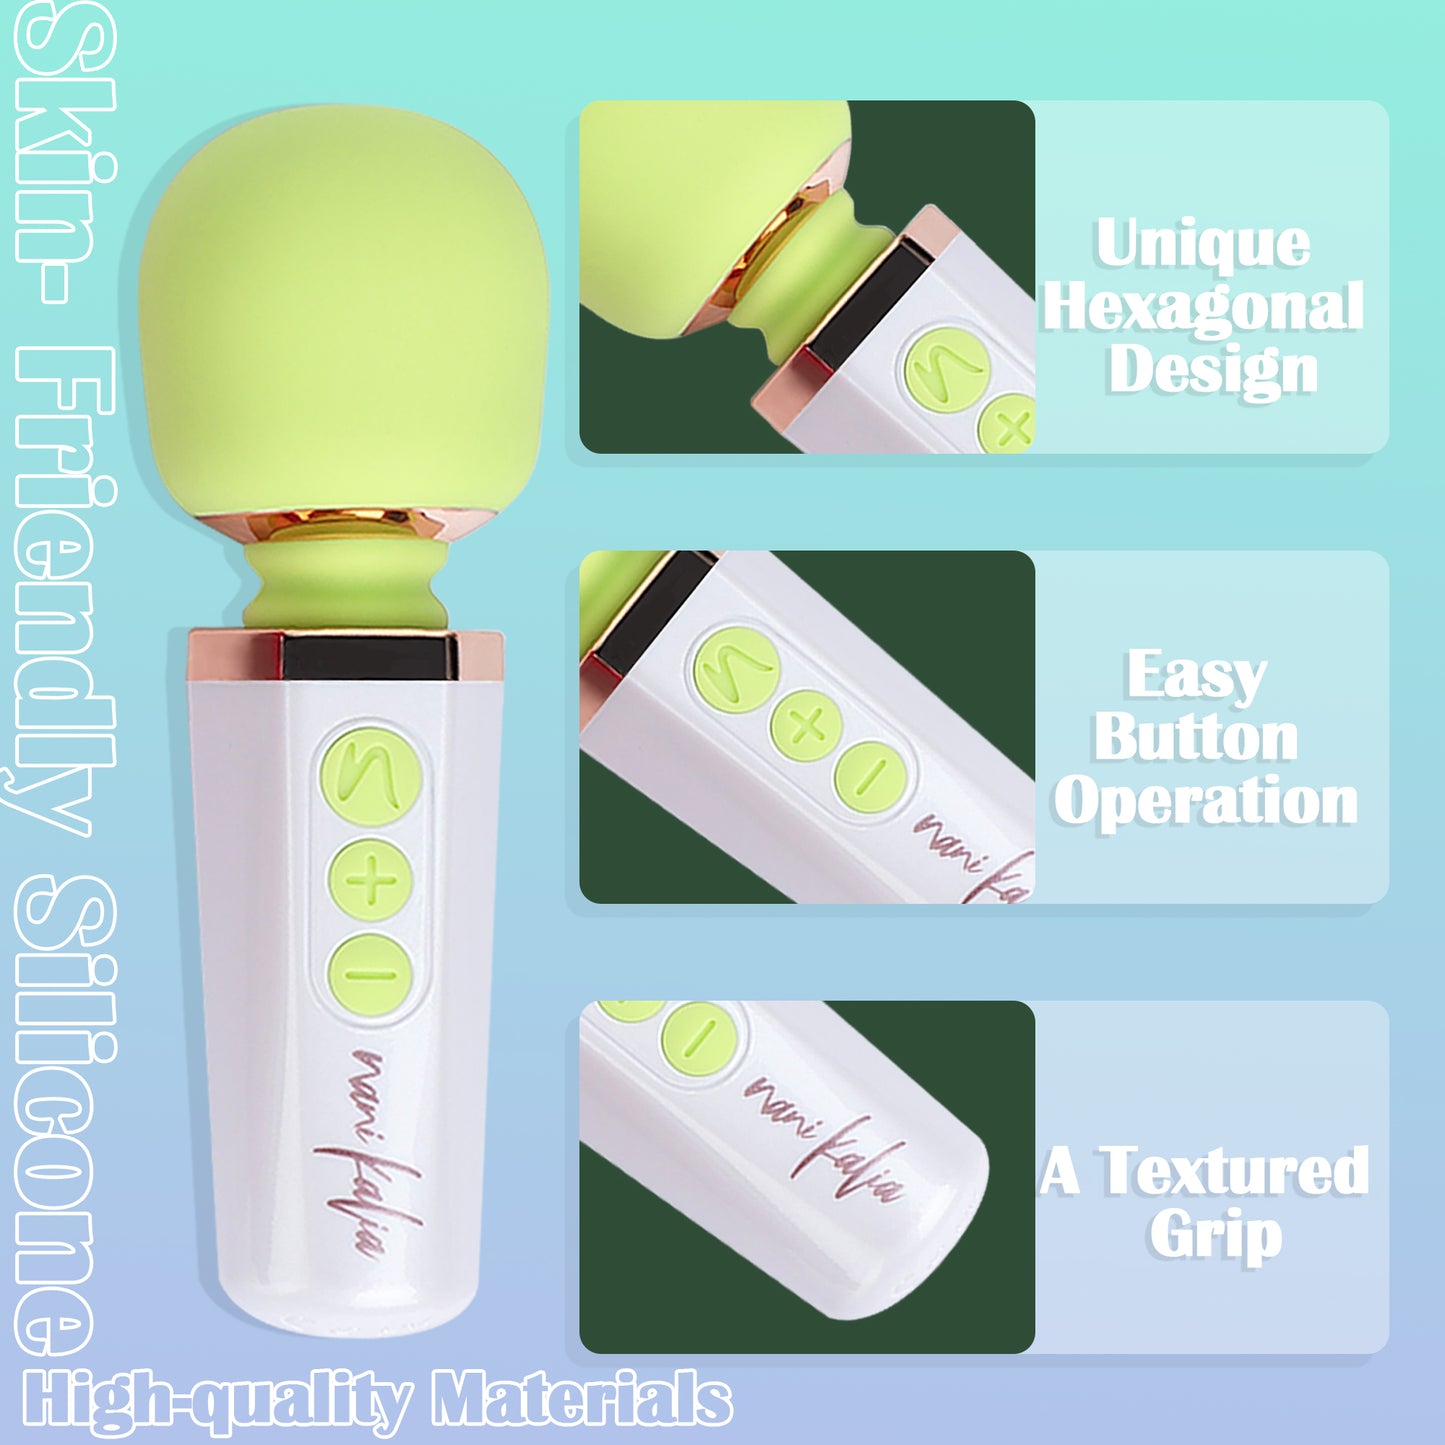 Nani Kalia NK-22 Premium Handheld Rechargeable Personal Massager - Deep Tissue Body Relaxation and Muscle Relief (White Green）